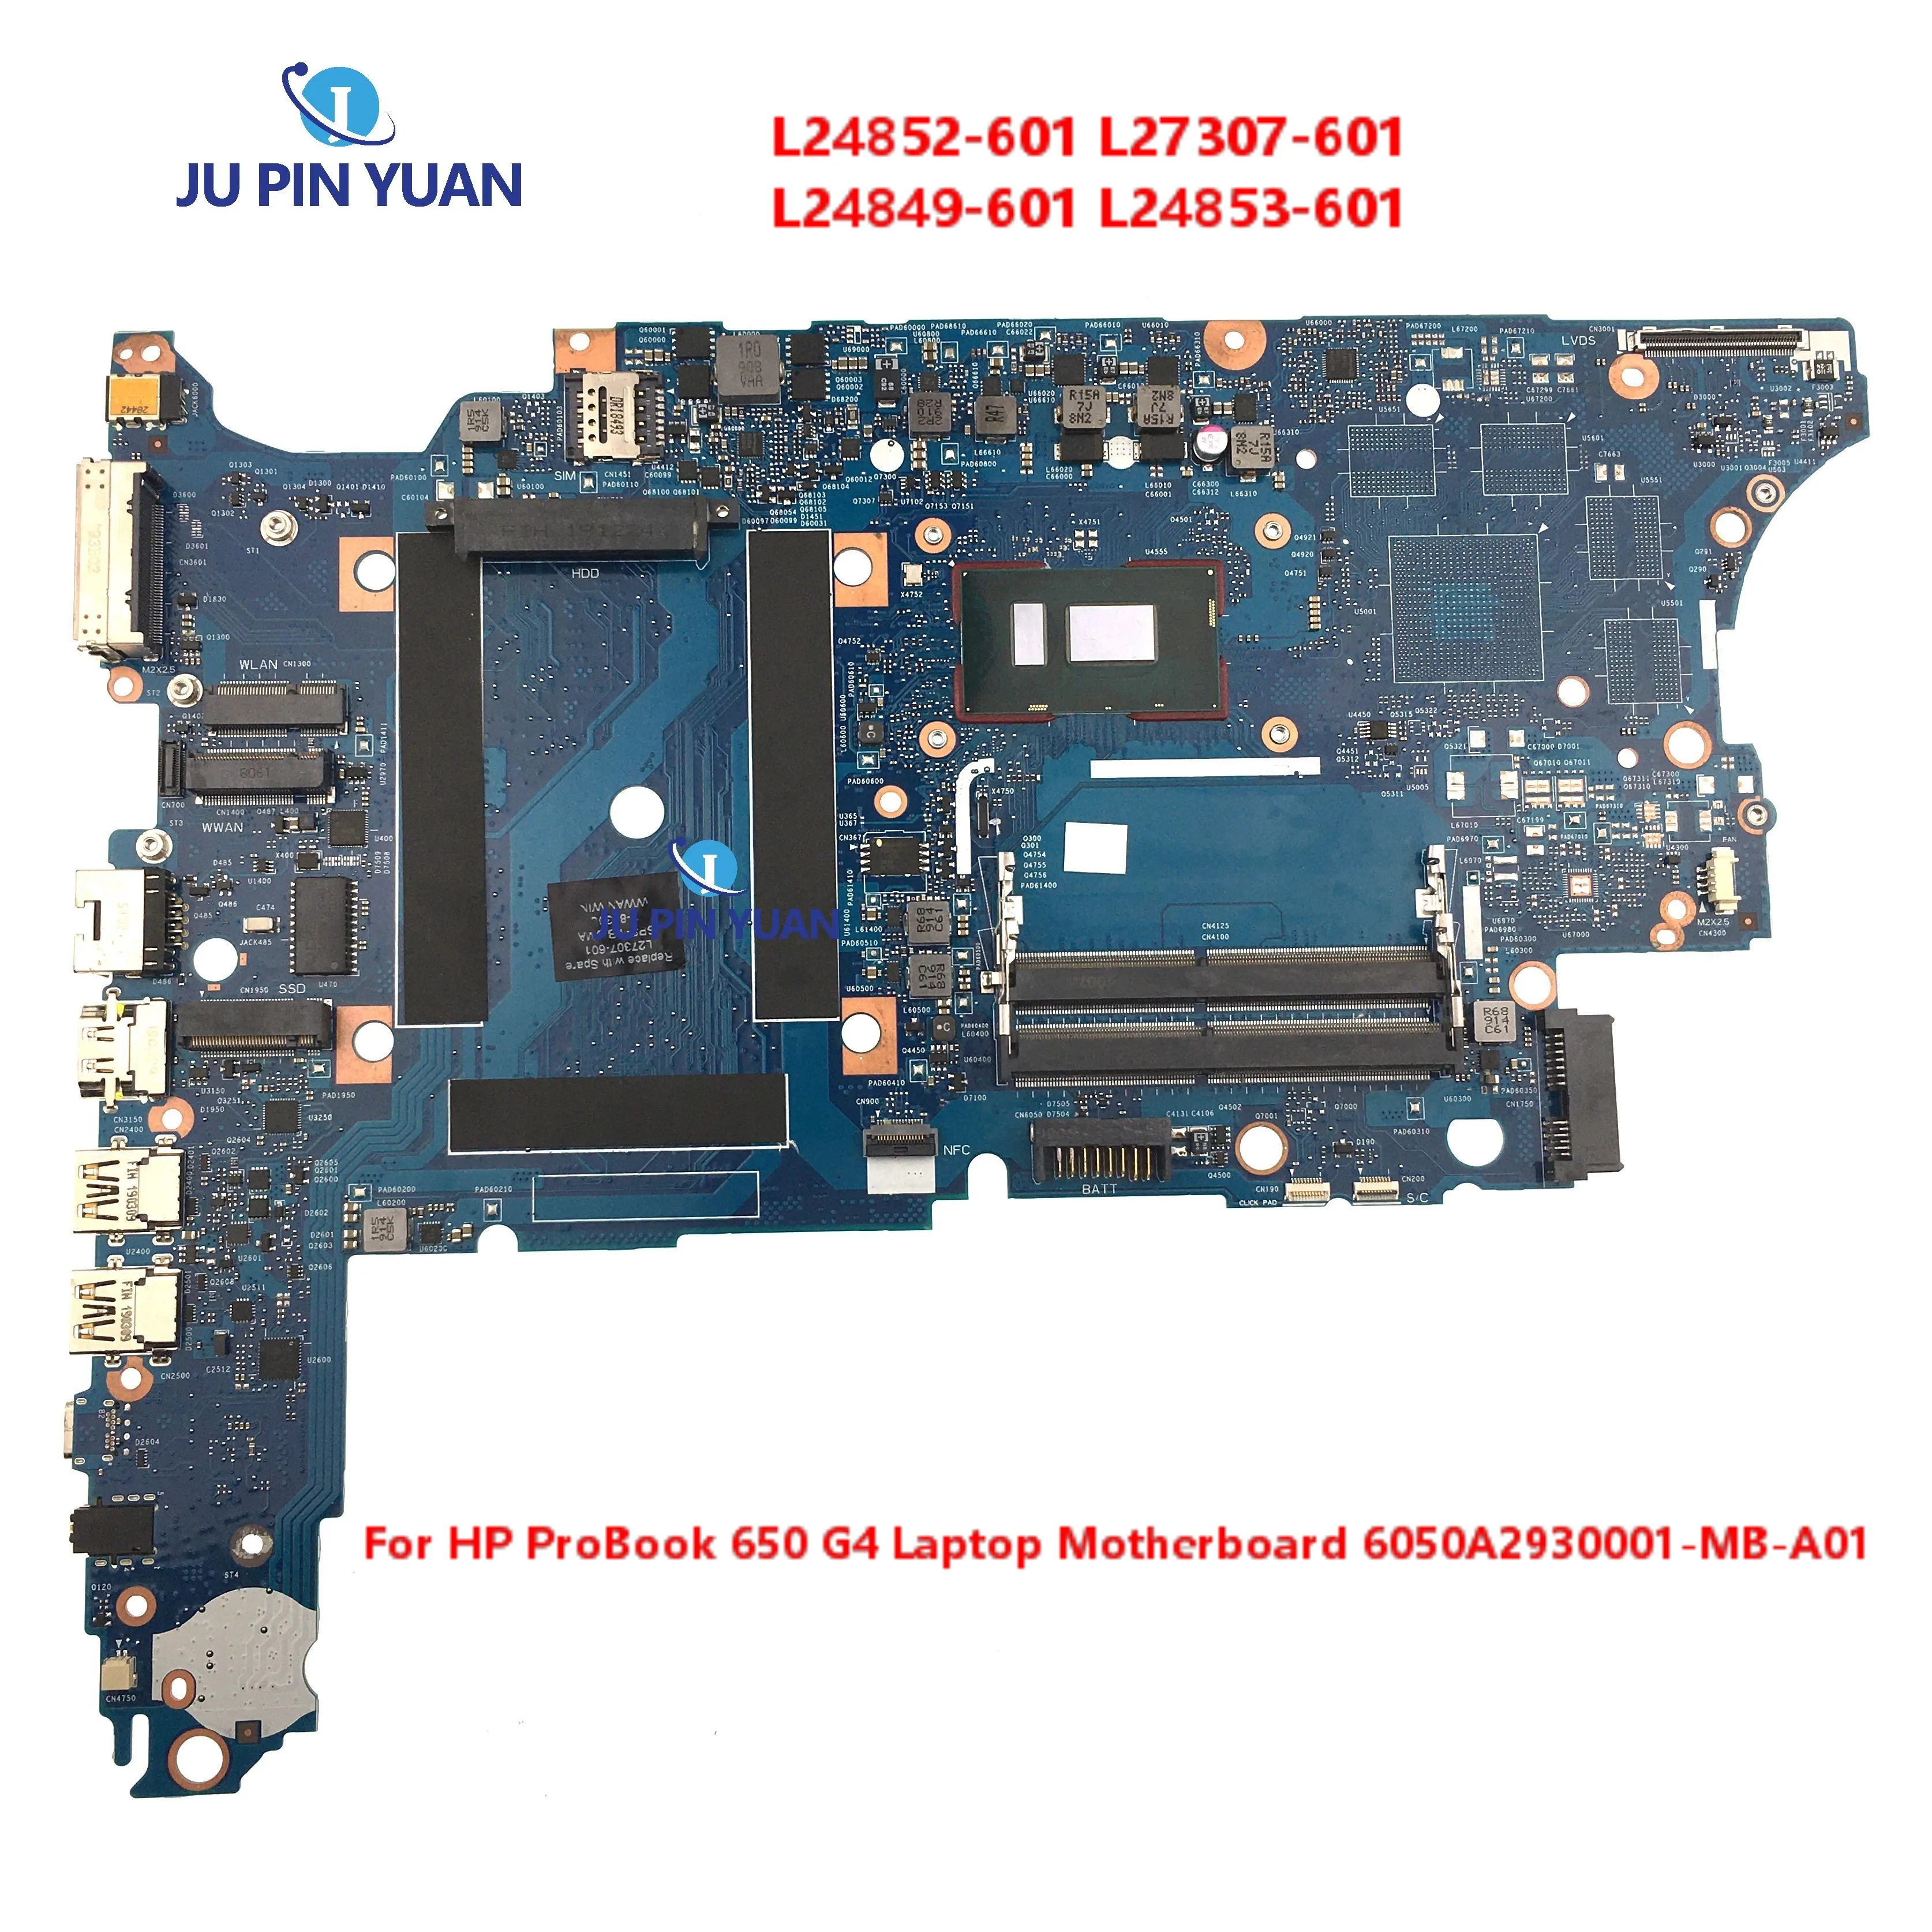 

L24852-601 L27307-601 For HP ProBook 650 G4 Laptop Motherboard 6050A2930001-MB-A01 Mainboard L24849-601 L24853-601 100% Tested